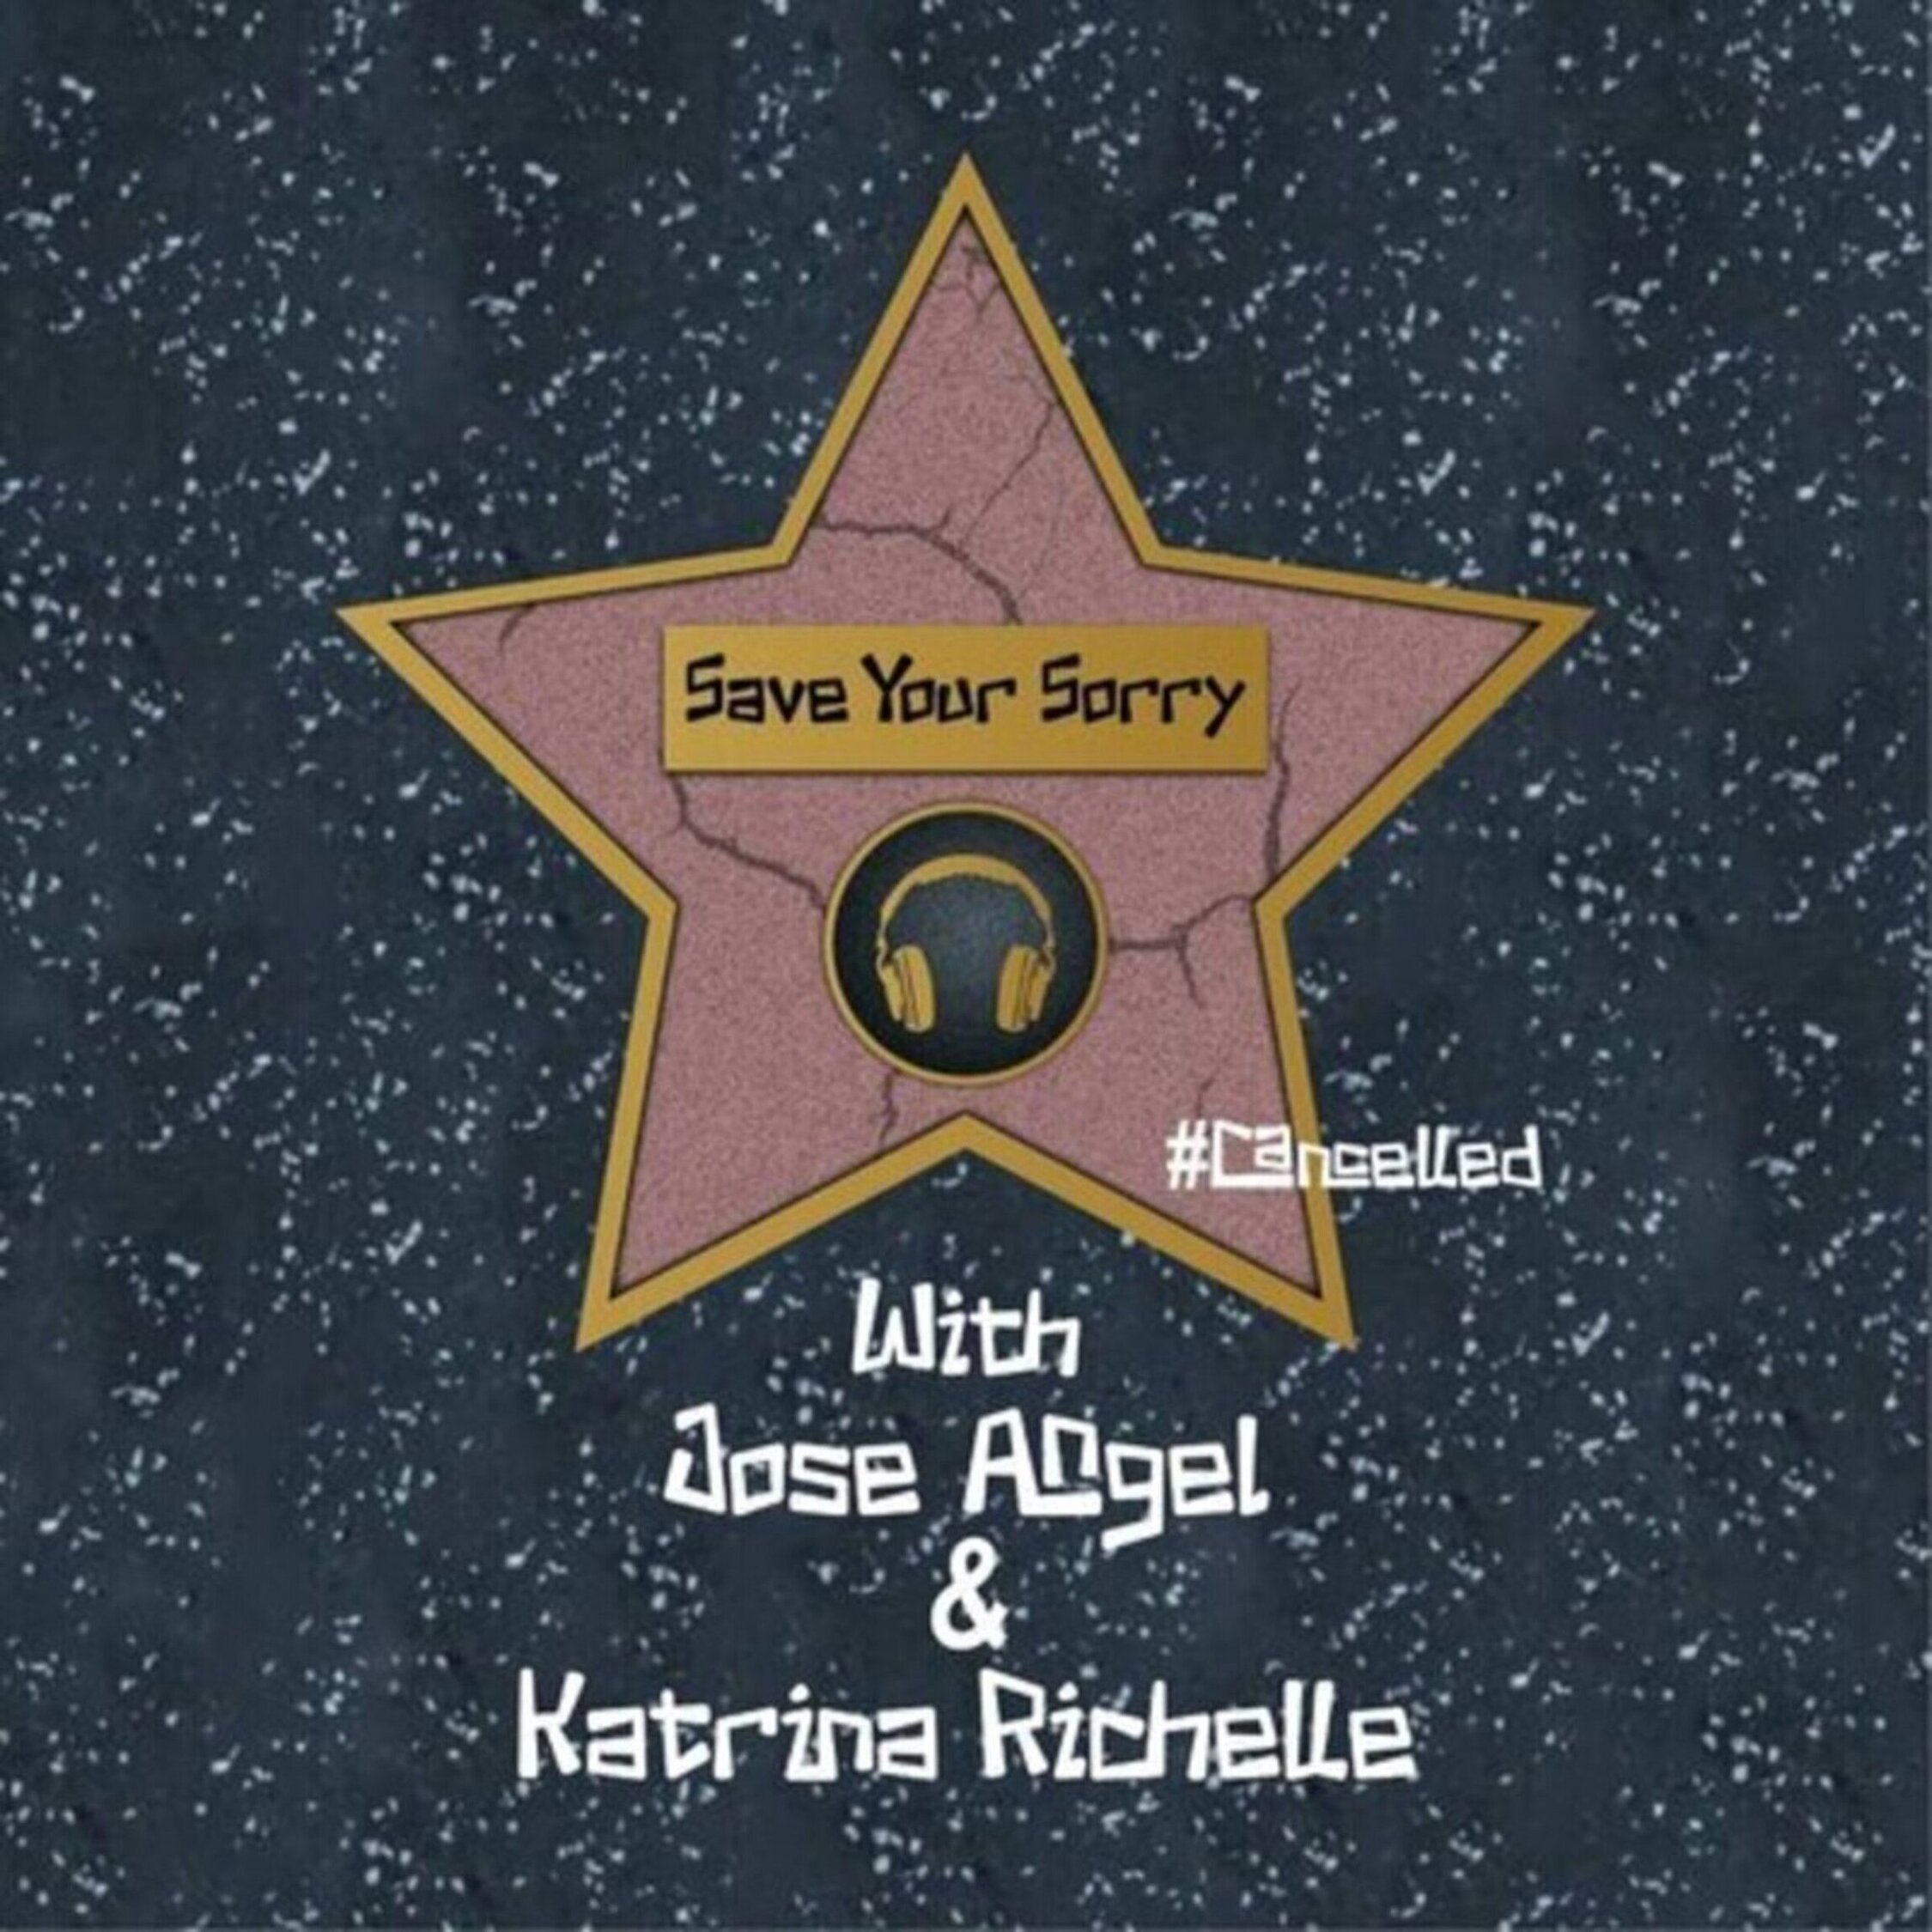 Artwork for Save Your Sorry